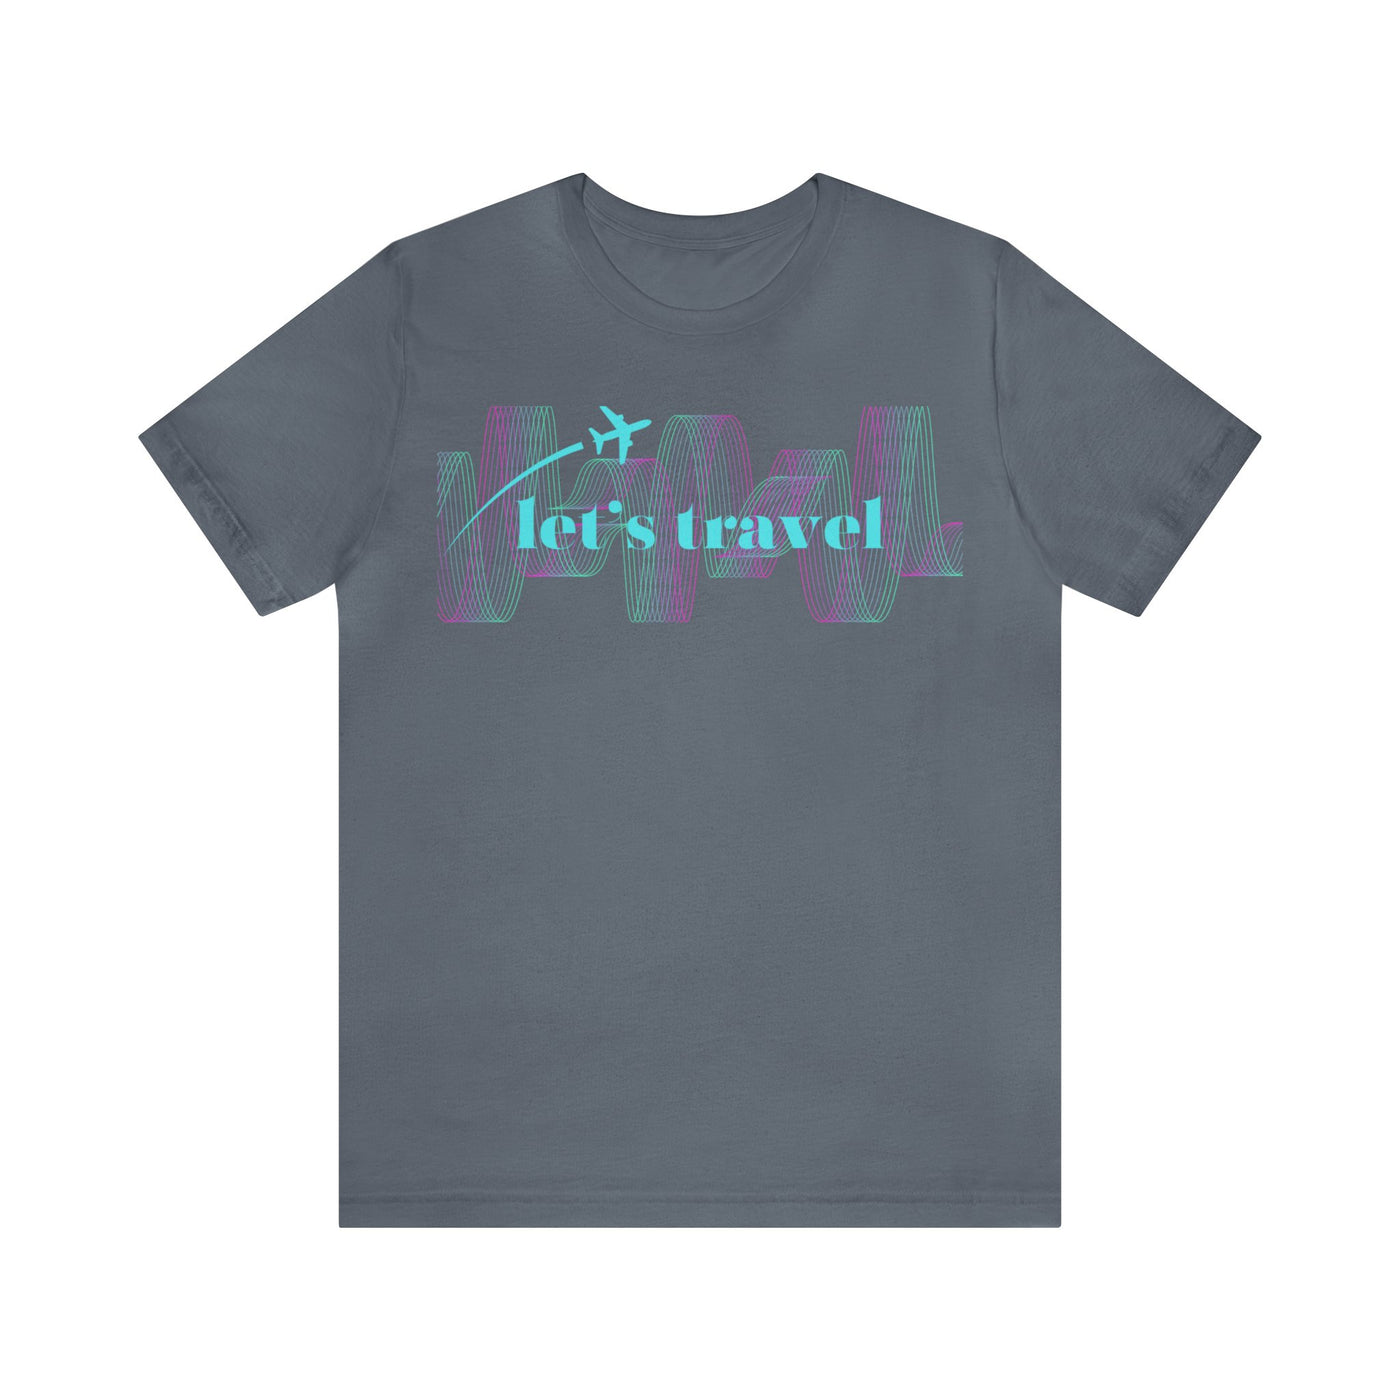 Let's Travel Jersey Tee